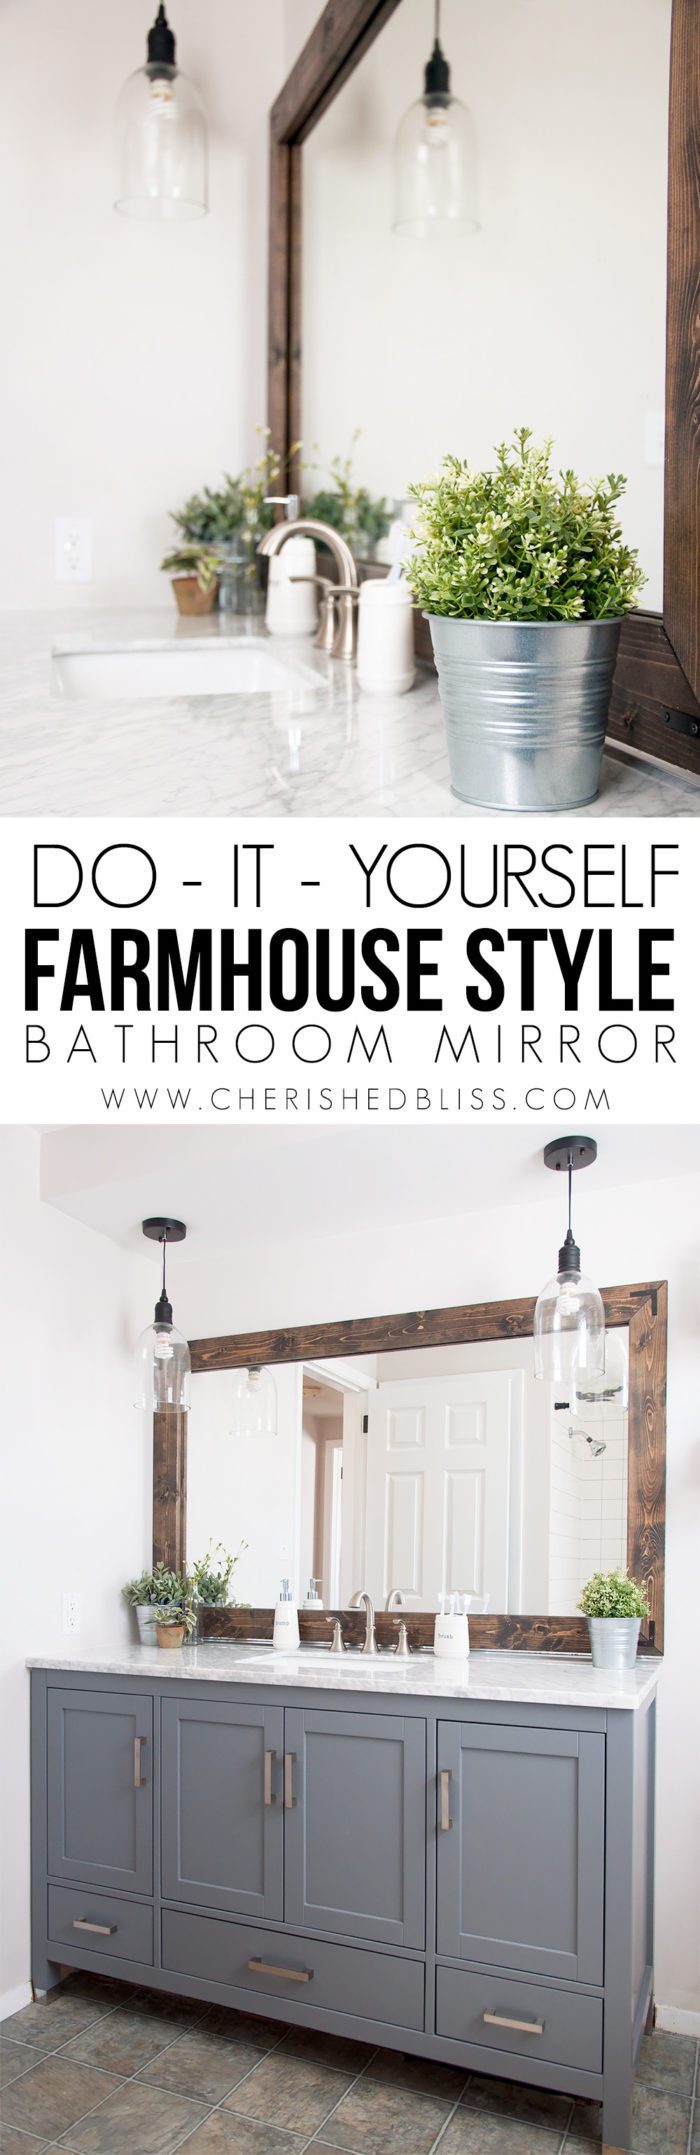 Add character to your bathroom with this DIY Farmhouse Style Bathroom Mirror Tutorial